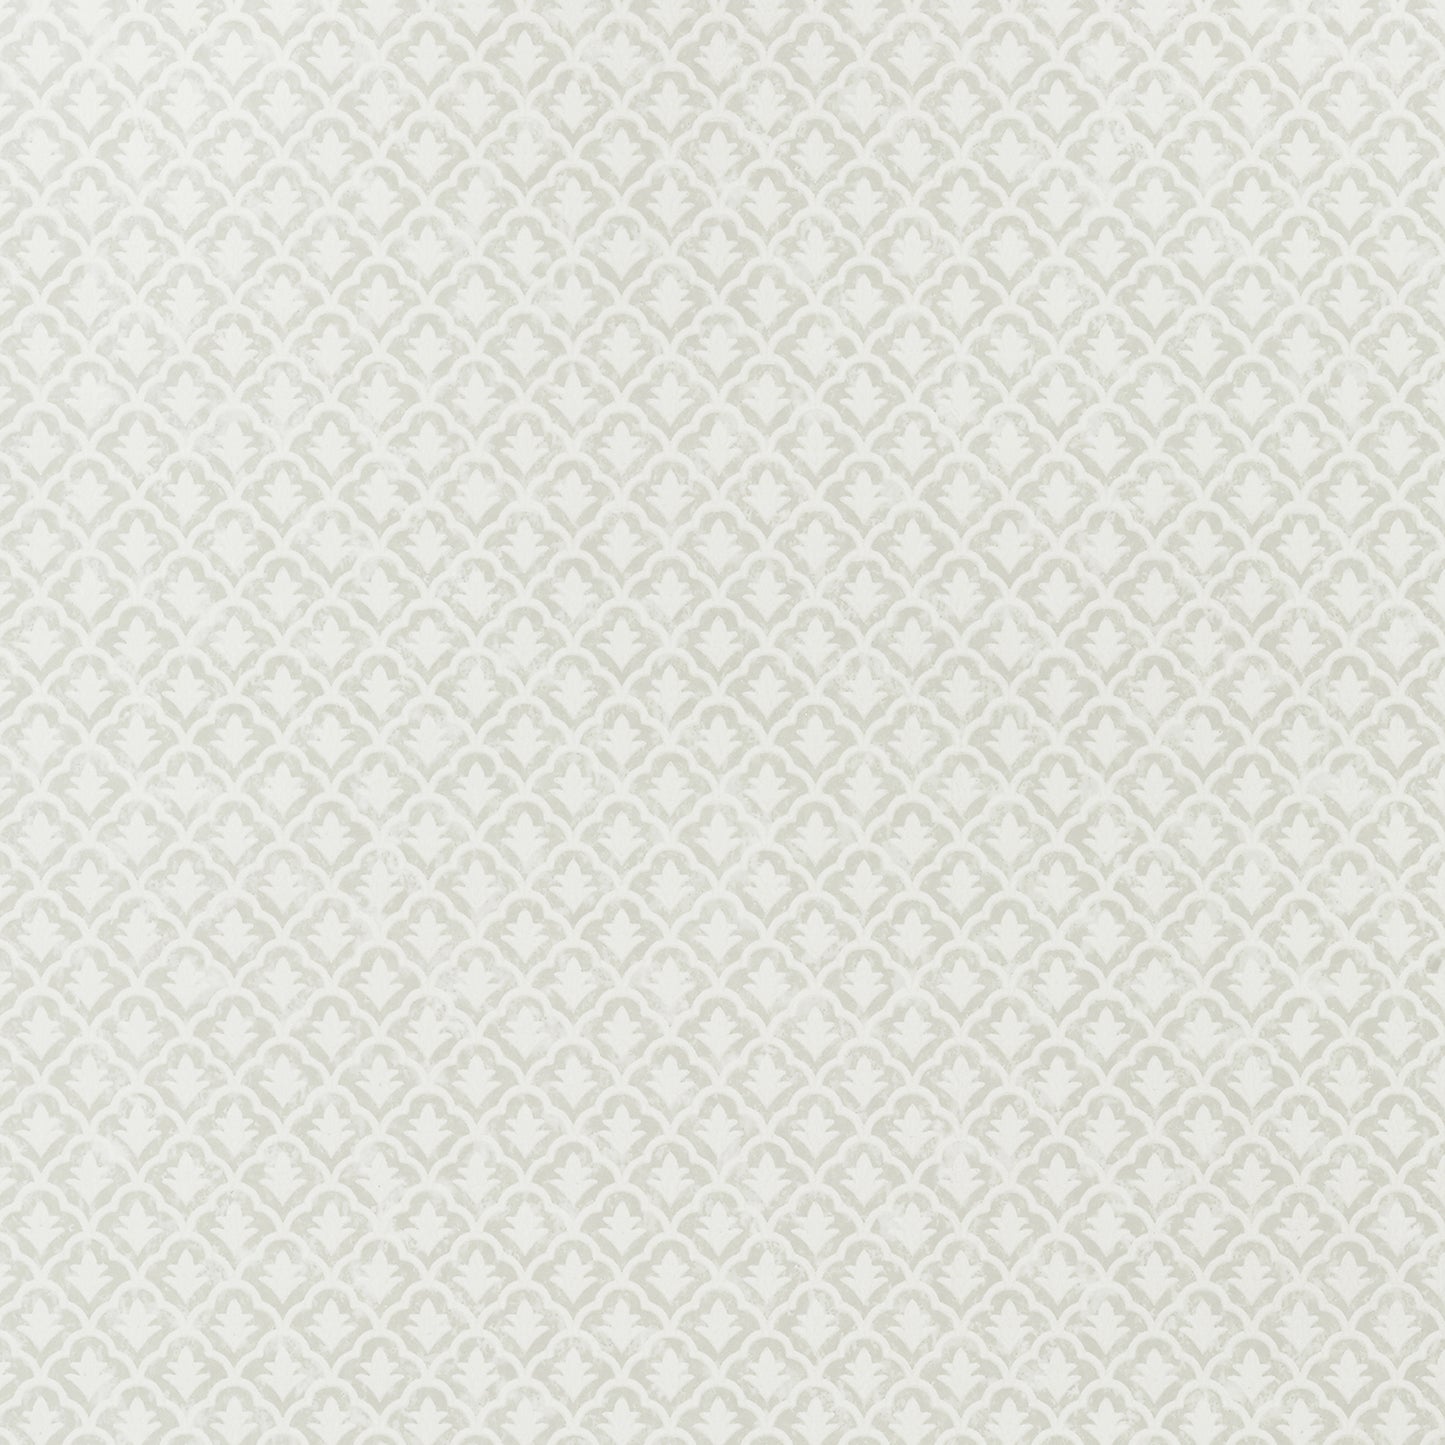 Purchase  Ann French Wallpaper Pattern number AT79137 pattern name  Fairfield